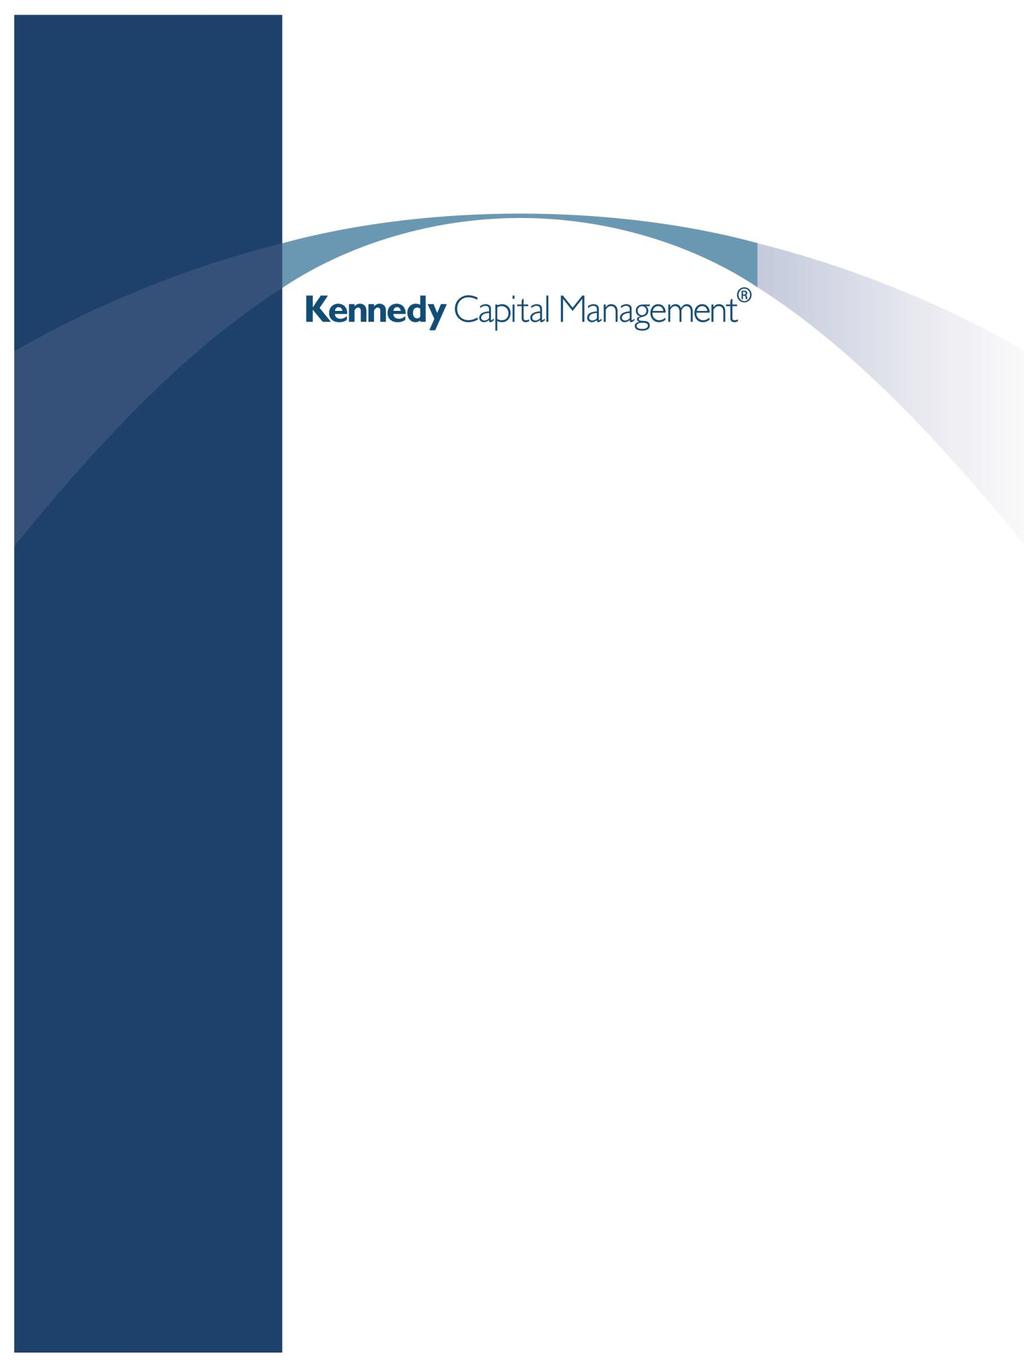 ADV Part 2A September 26, 2017 Kennedy Capital Management, Inc. 10829 Olive Boulevard Suite 100 St. Louis, MO 63141 314-432-0400 800-859-5462 www.kennedycapital.